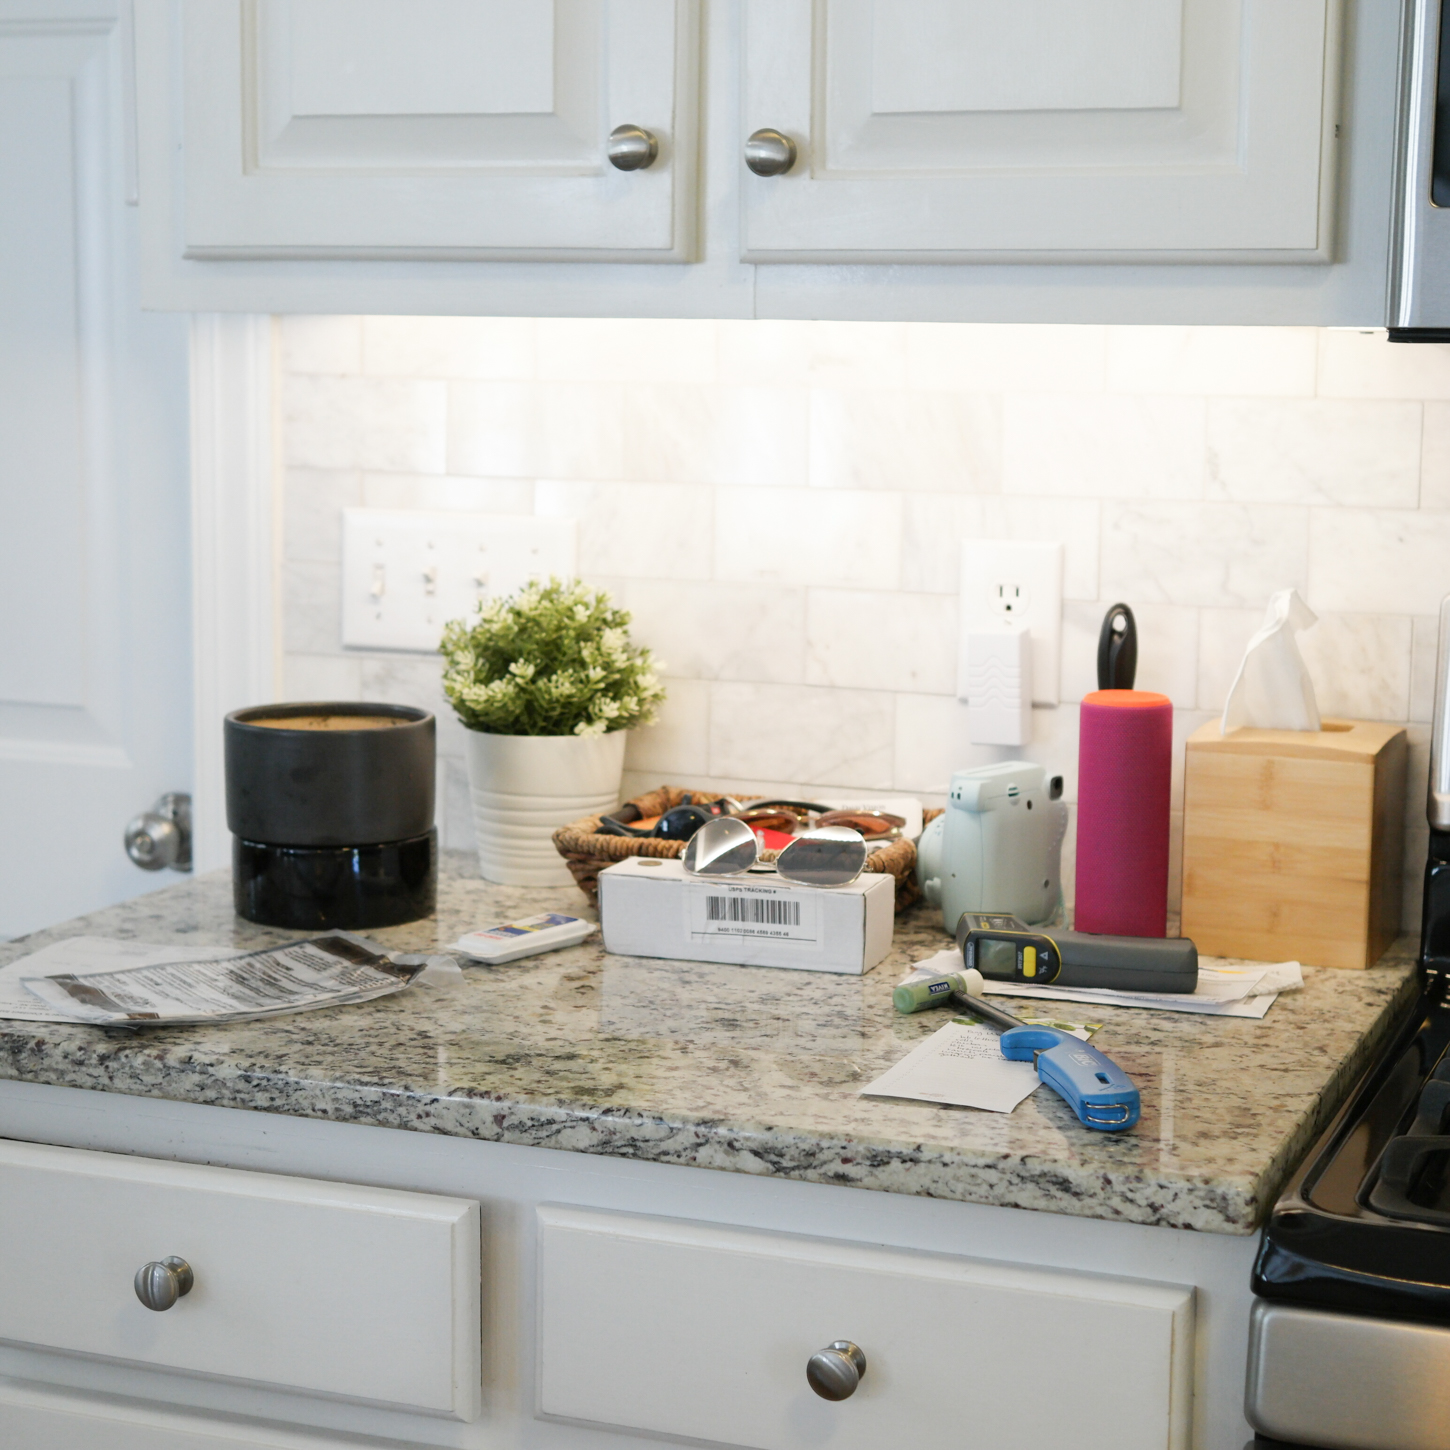 Housekeeping Routines: tackling kitchen clutter